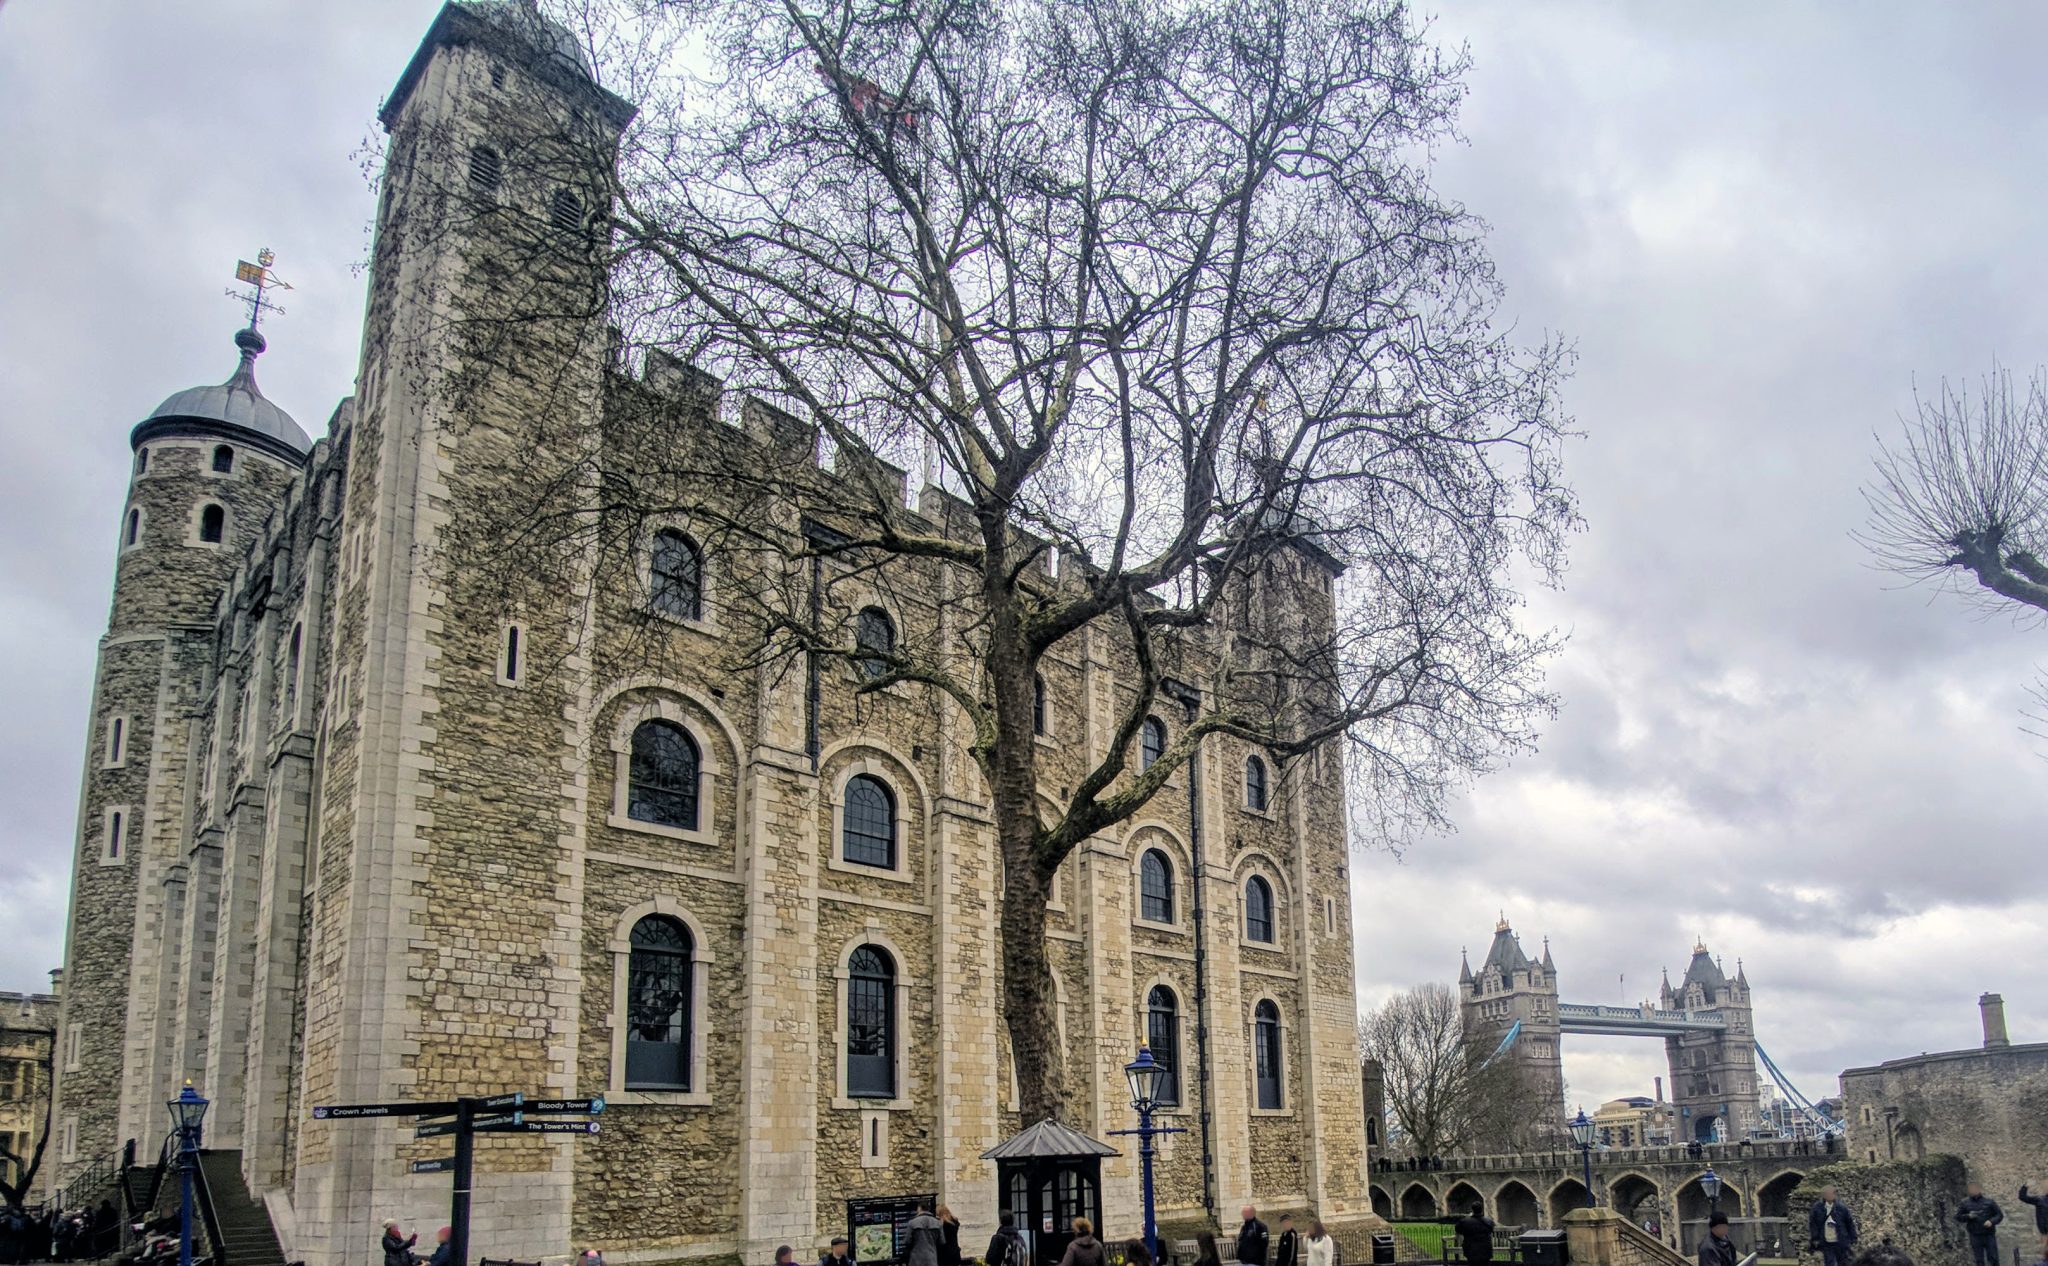 Tower of London and Tower Bridge on a cloudy day in London, UK